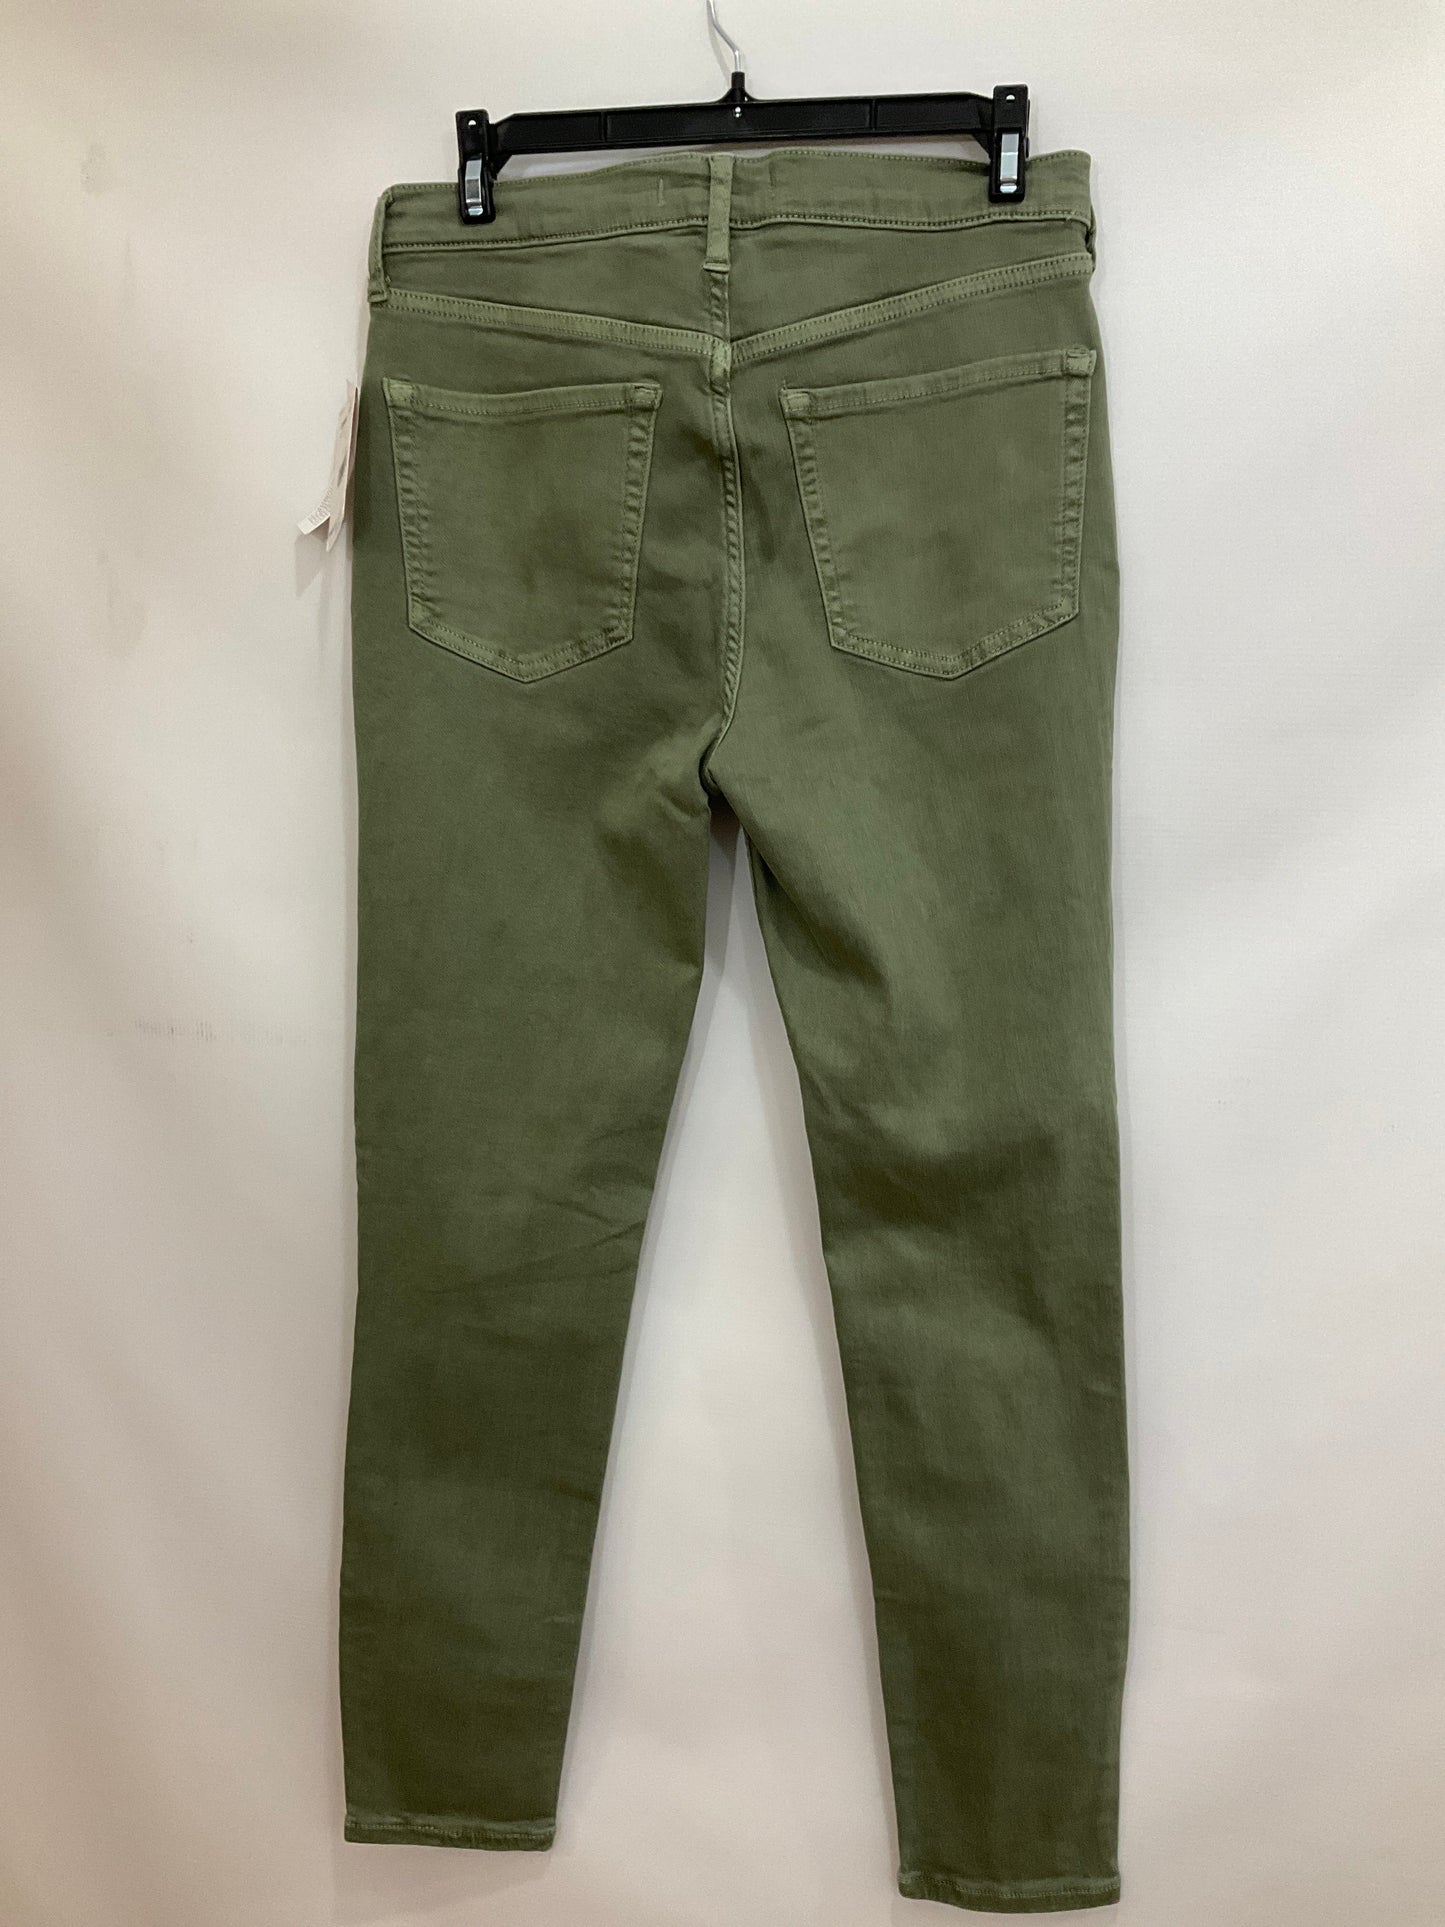 Green Pants Other Free People, Size 8